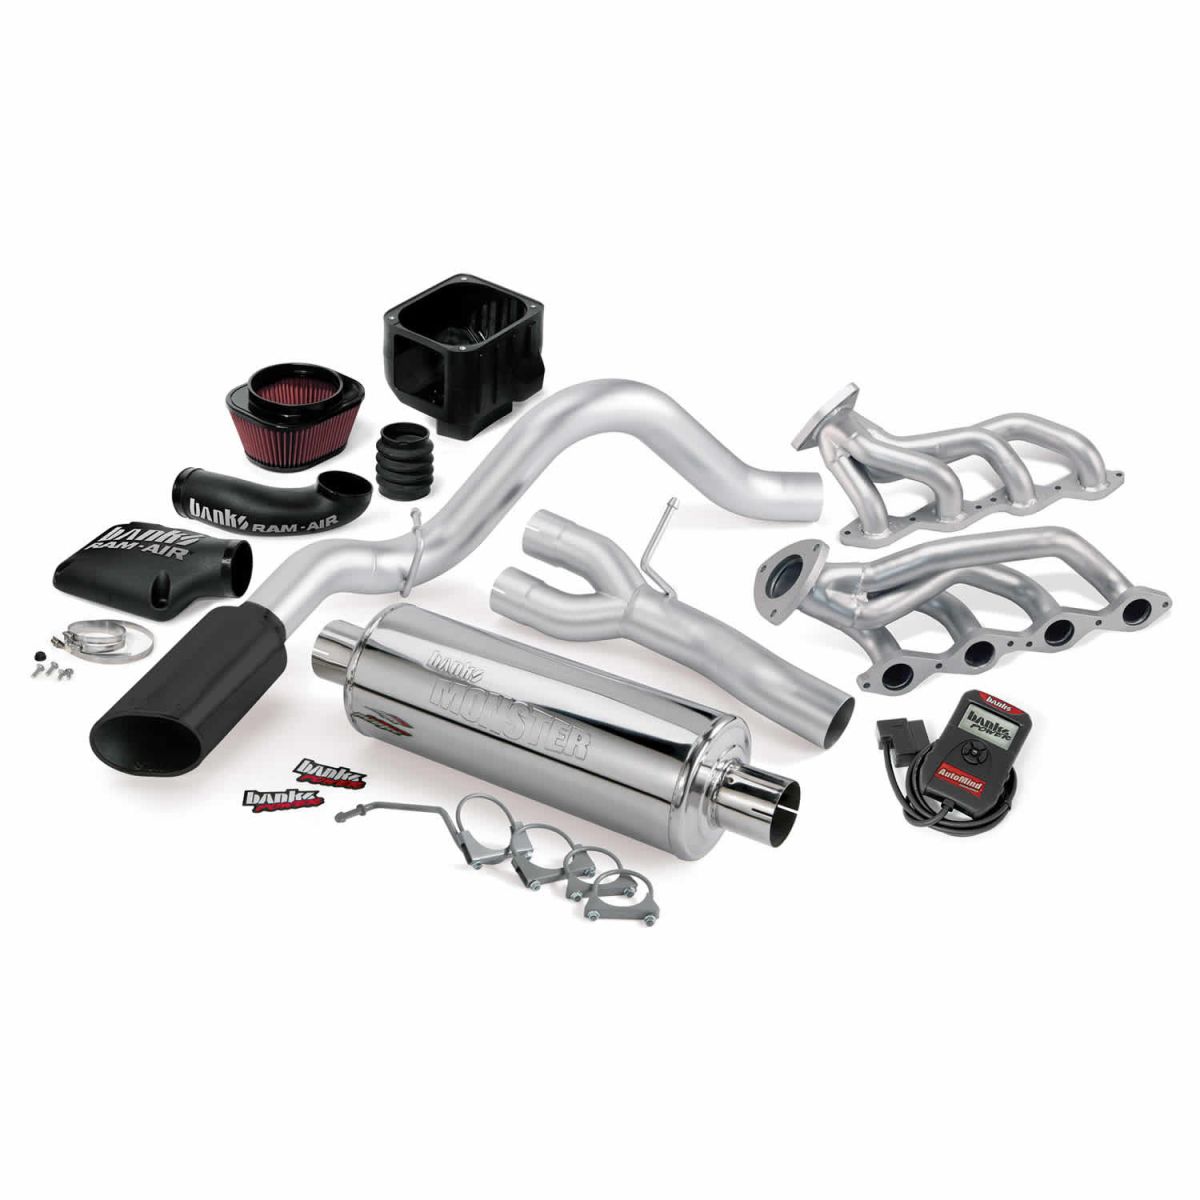 Banks Power - Banks Power PowerPack Bundle Complete Power System W/AutoMind Programmer Black Tailpipe 09 Chevy 5.3L CCSB-ECSB FFV Flex-Fuel Vehicle